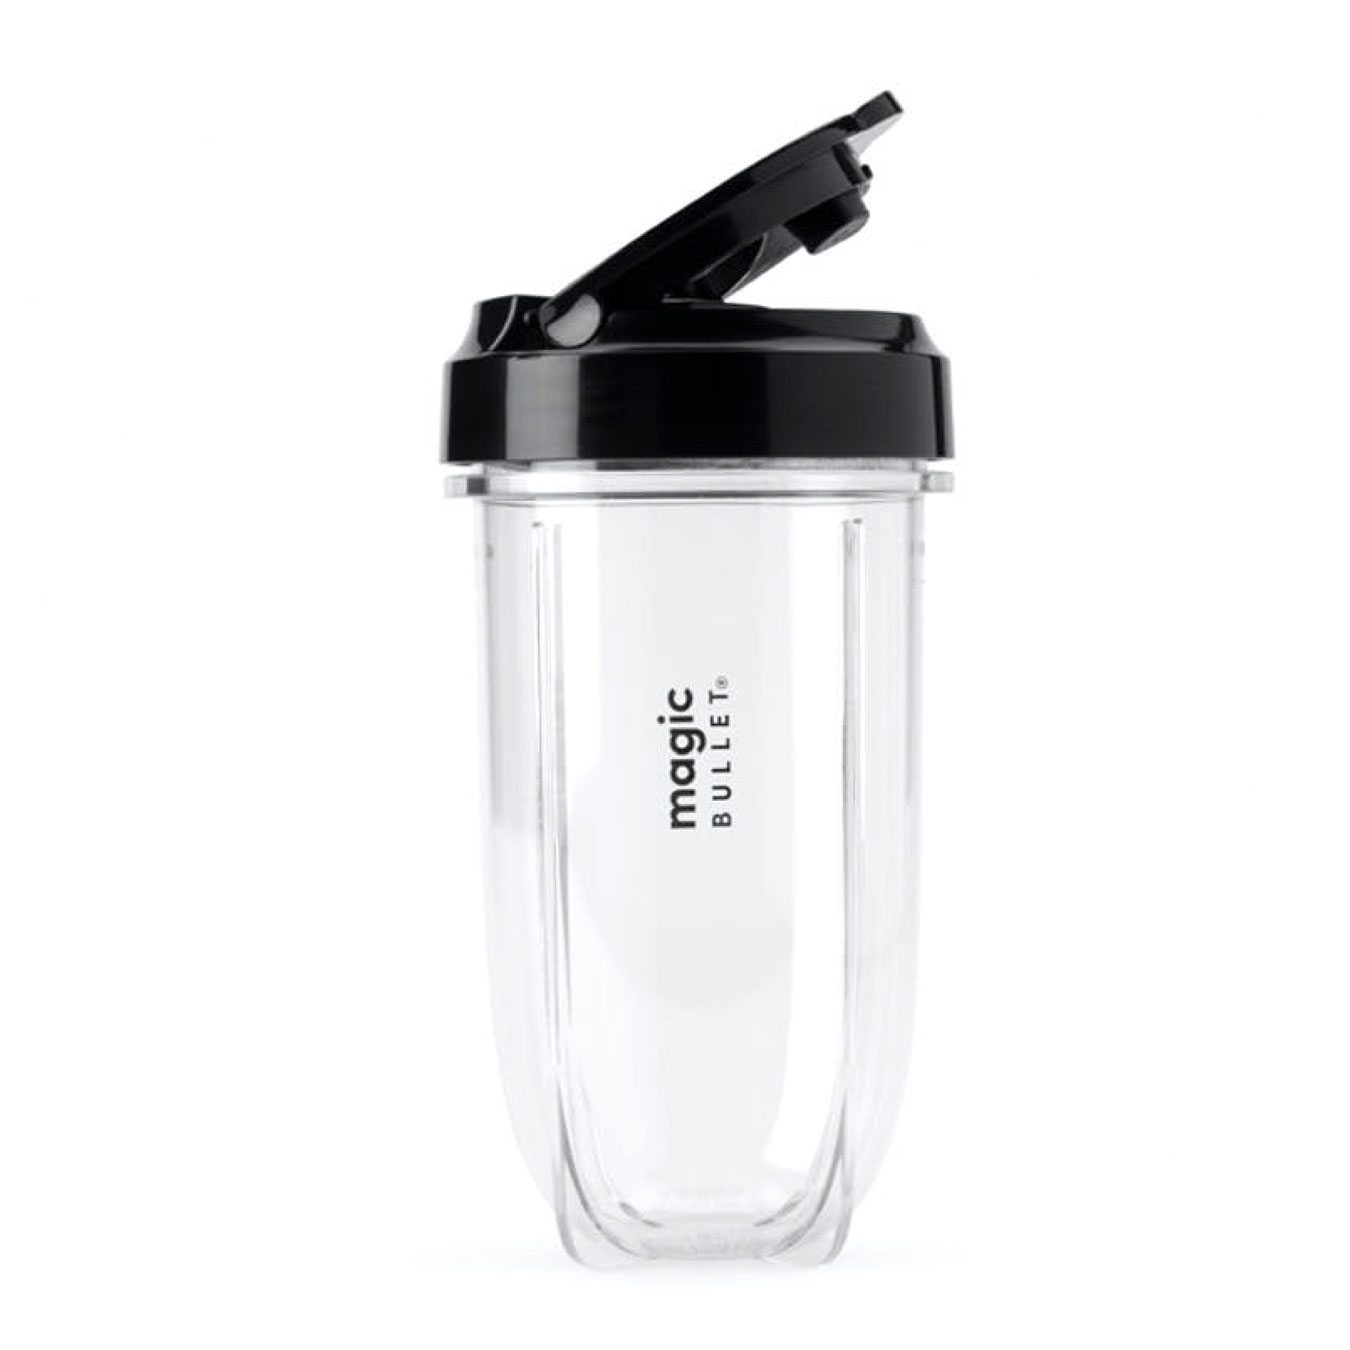 View magic bullet Kitchen Express Tall Cup with ToGo Lid information